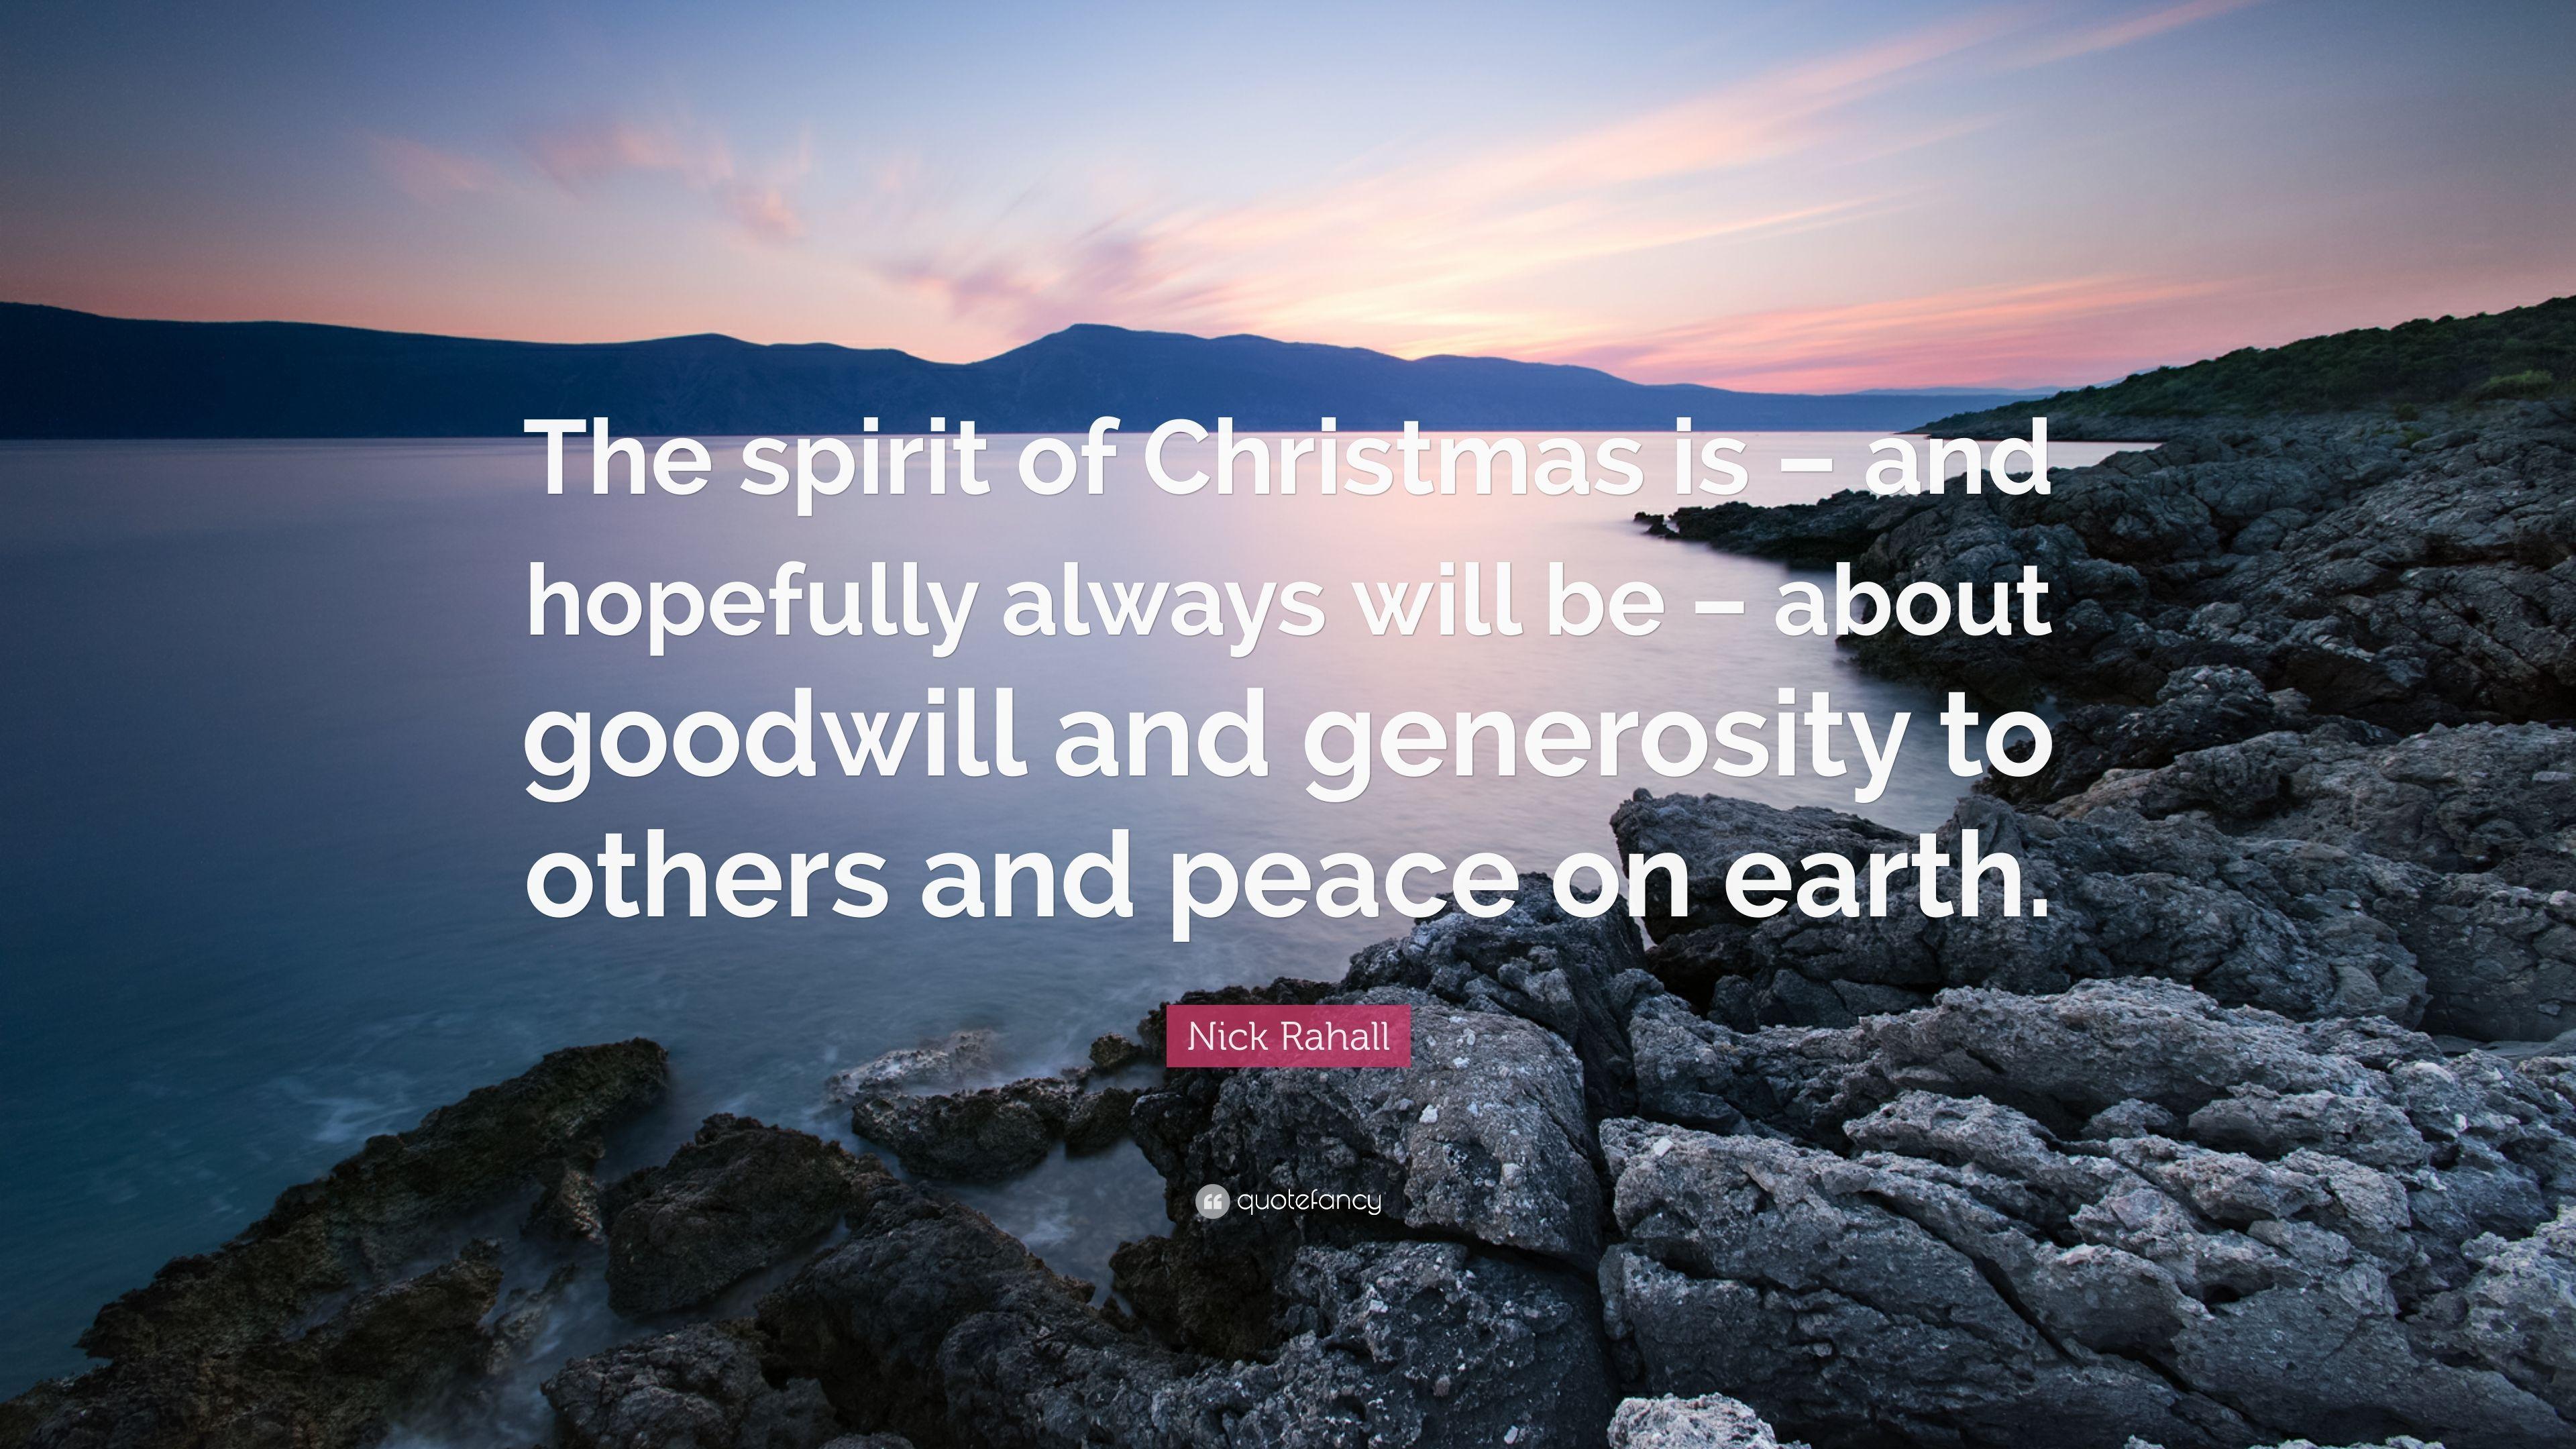 Nick Rahall Quote: “The spirit of Christmas is